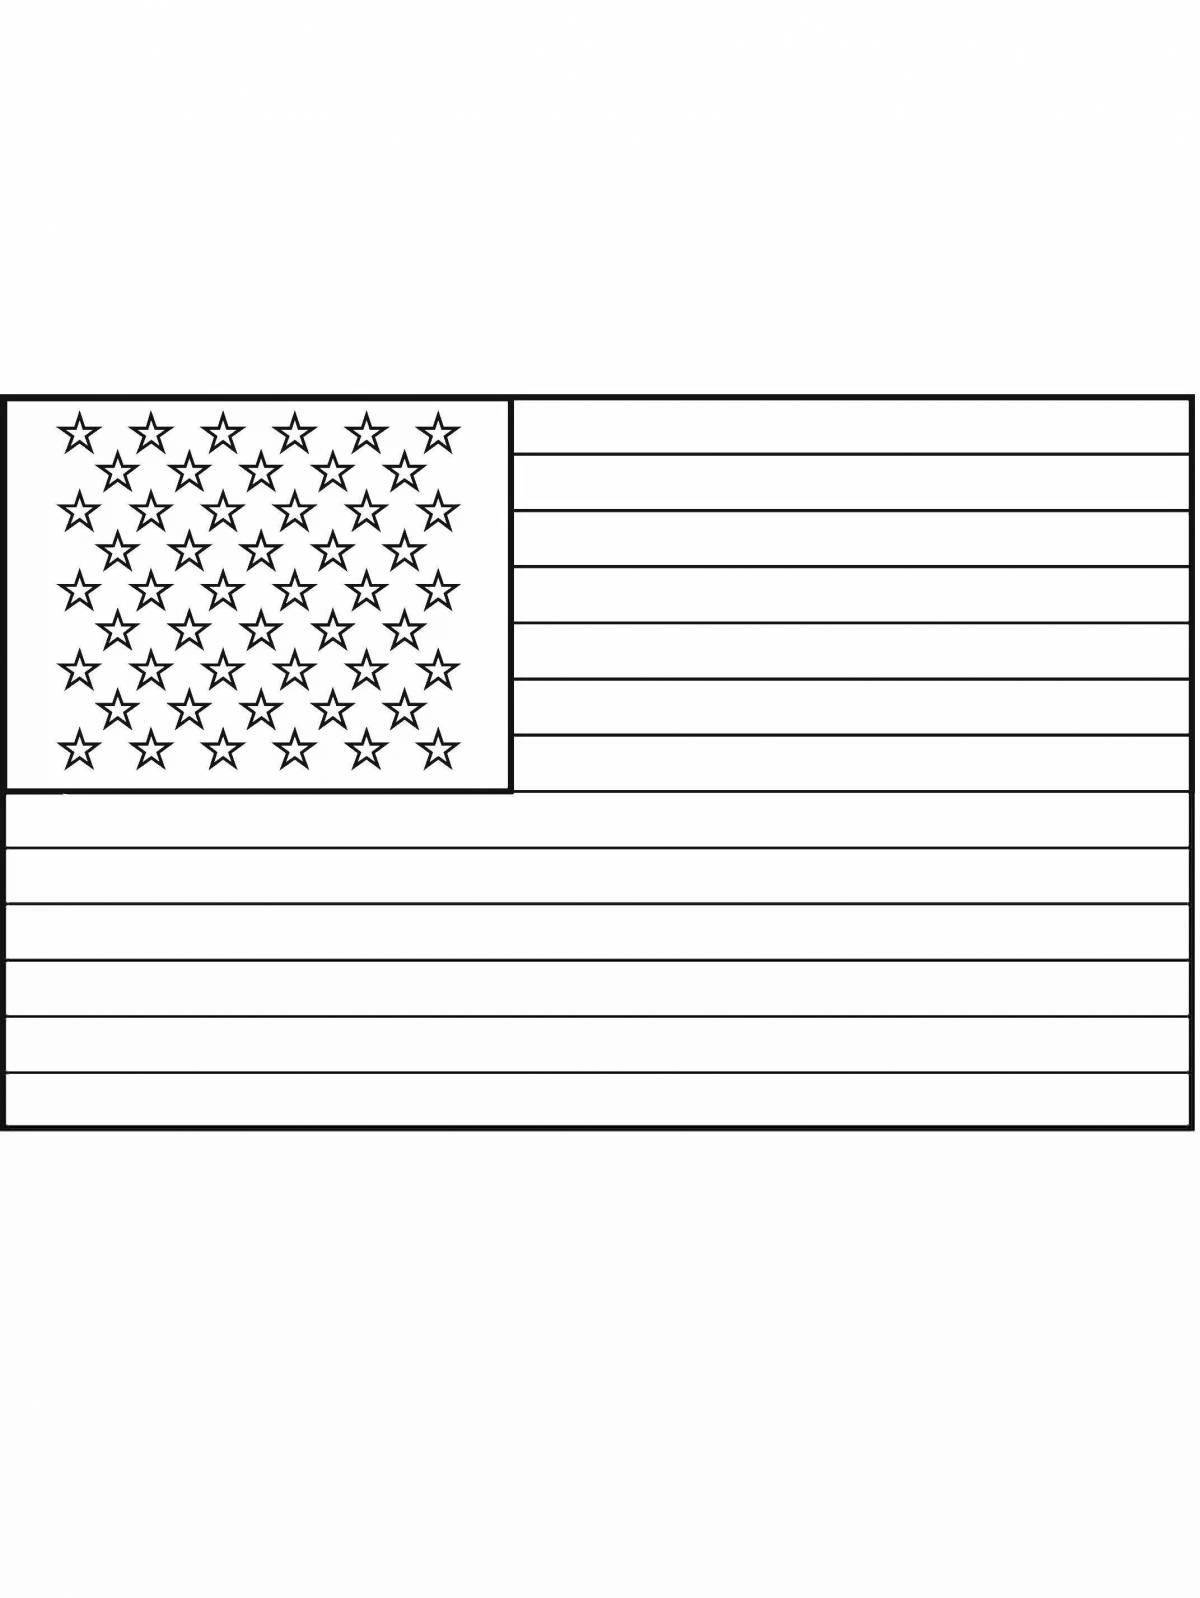 Great coloring book with american flag